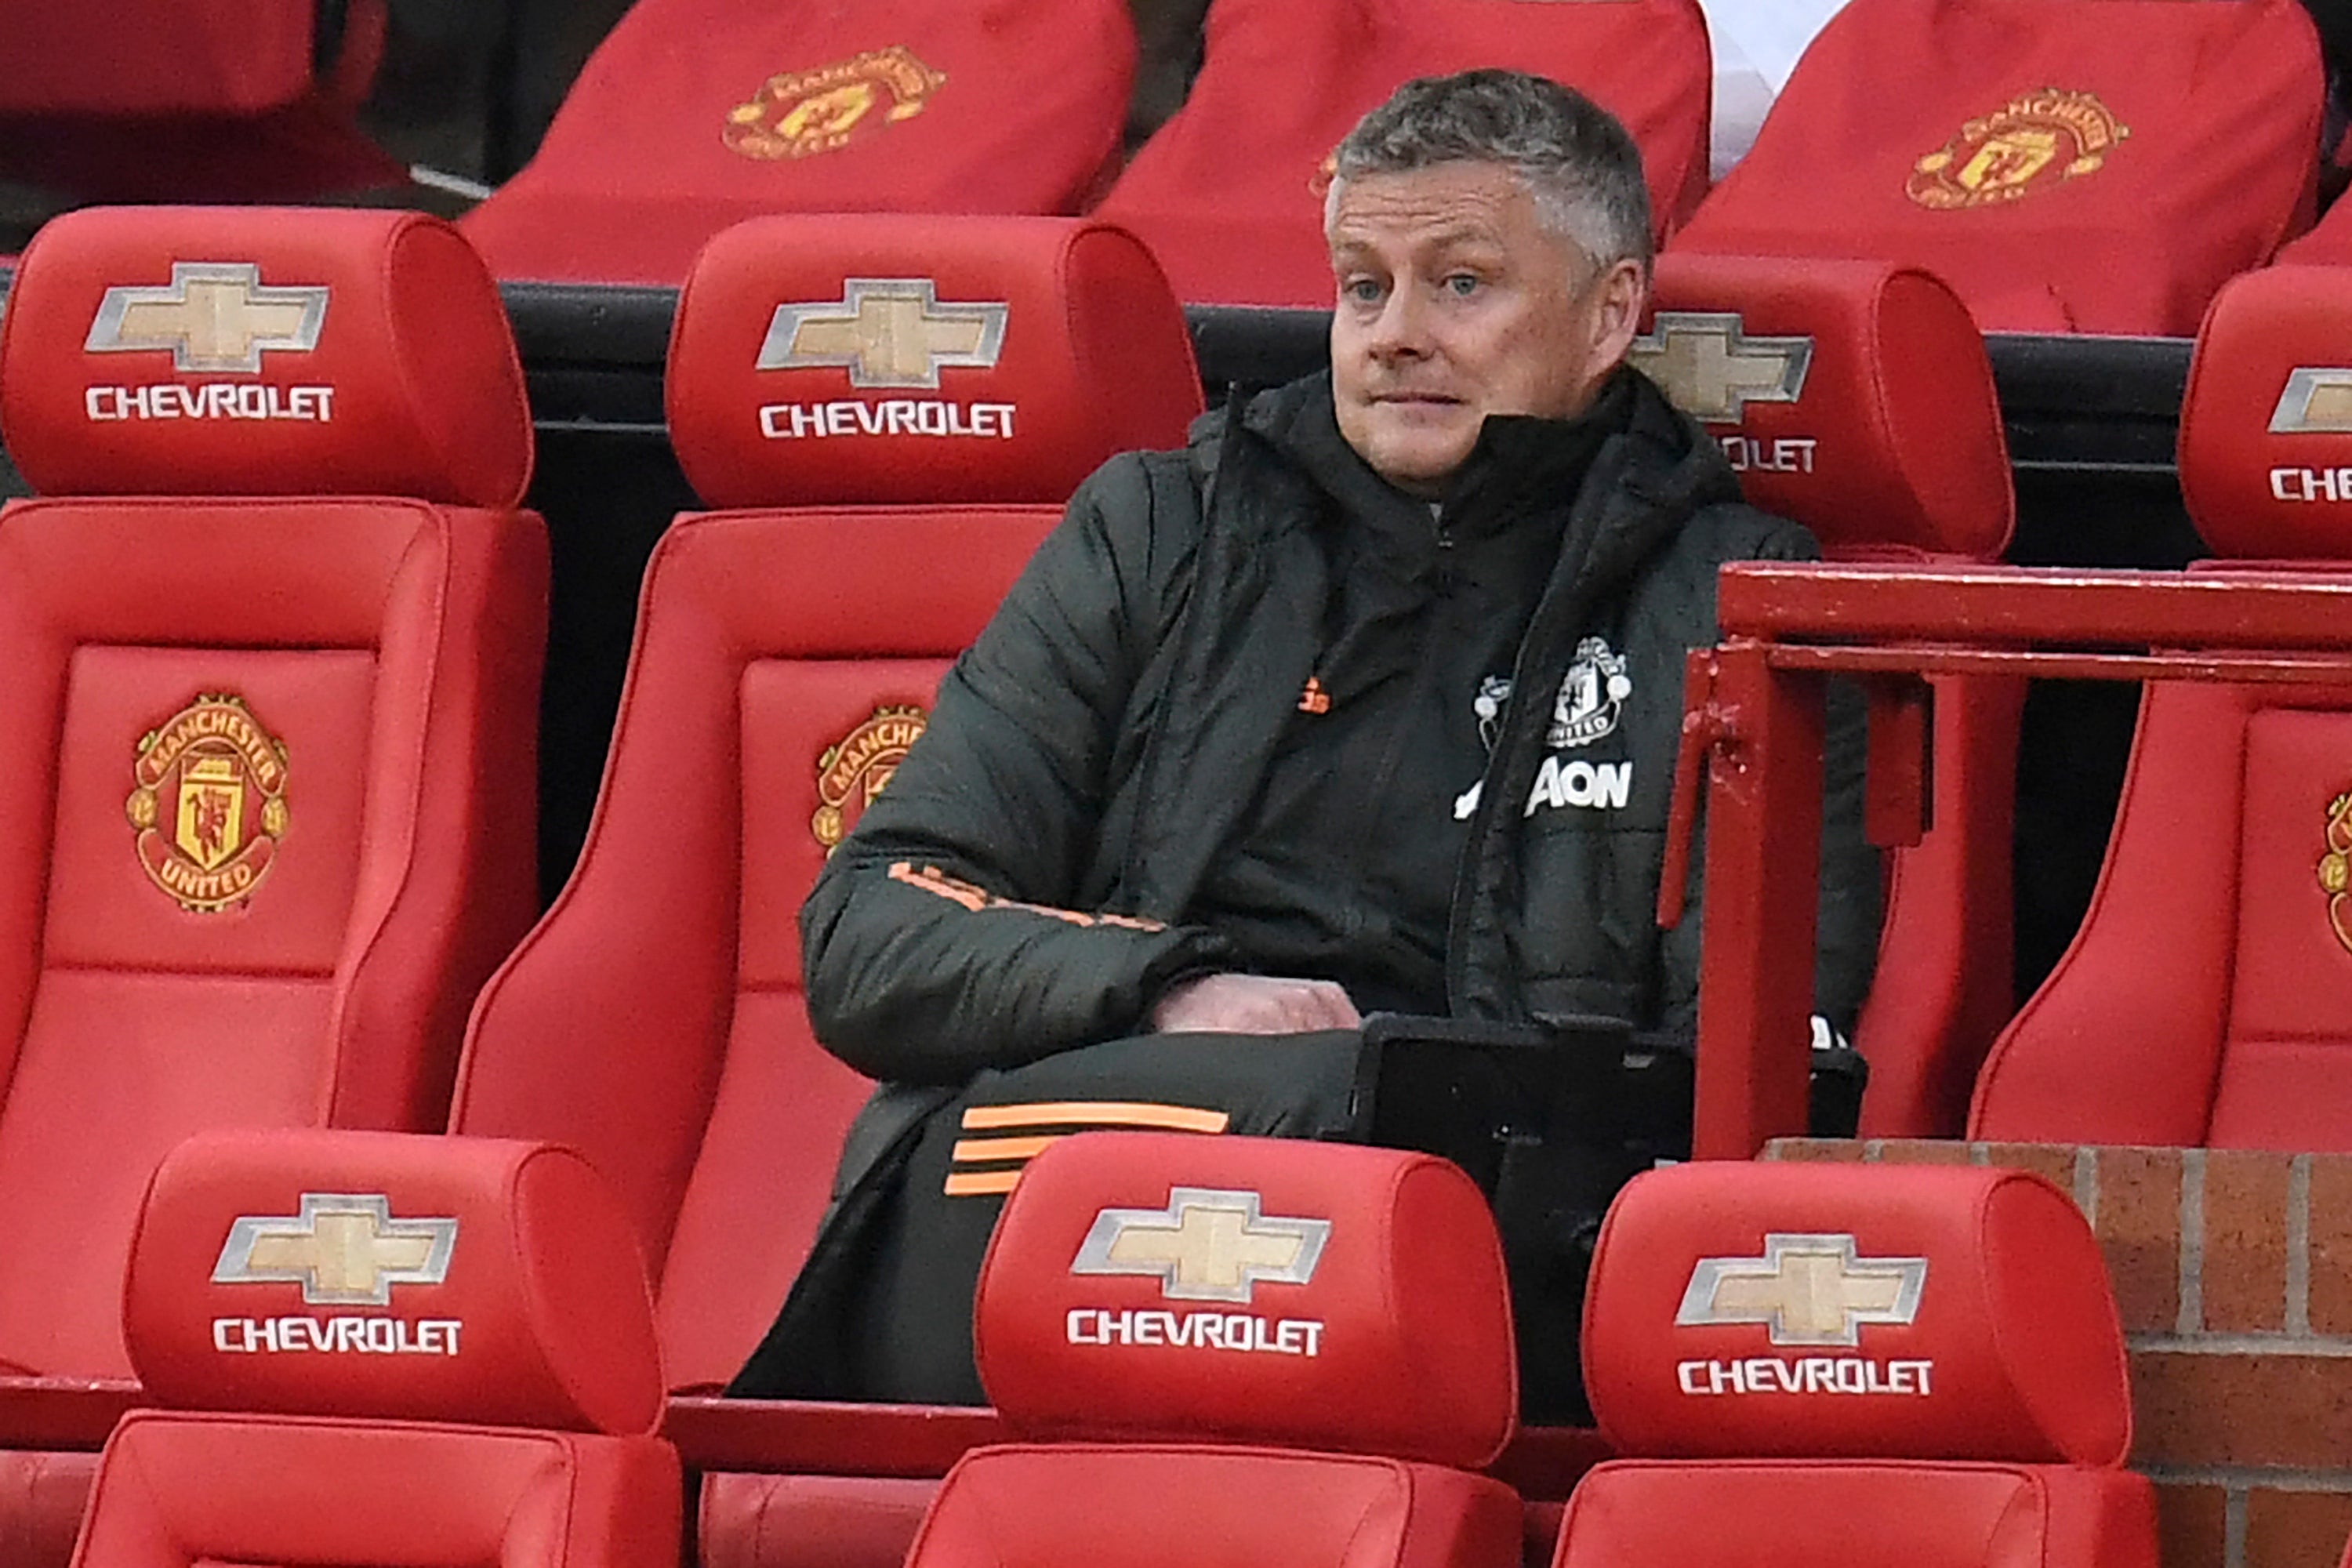 Ole Gunnar Solskjaer was forced to make 10 changes to his team against Leicester